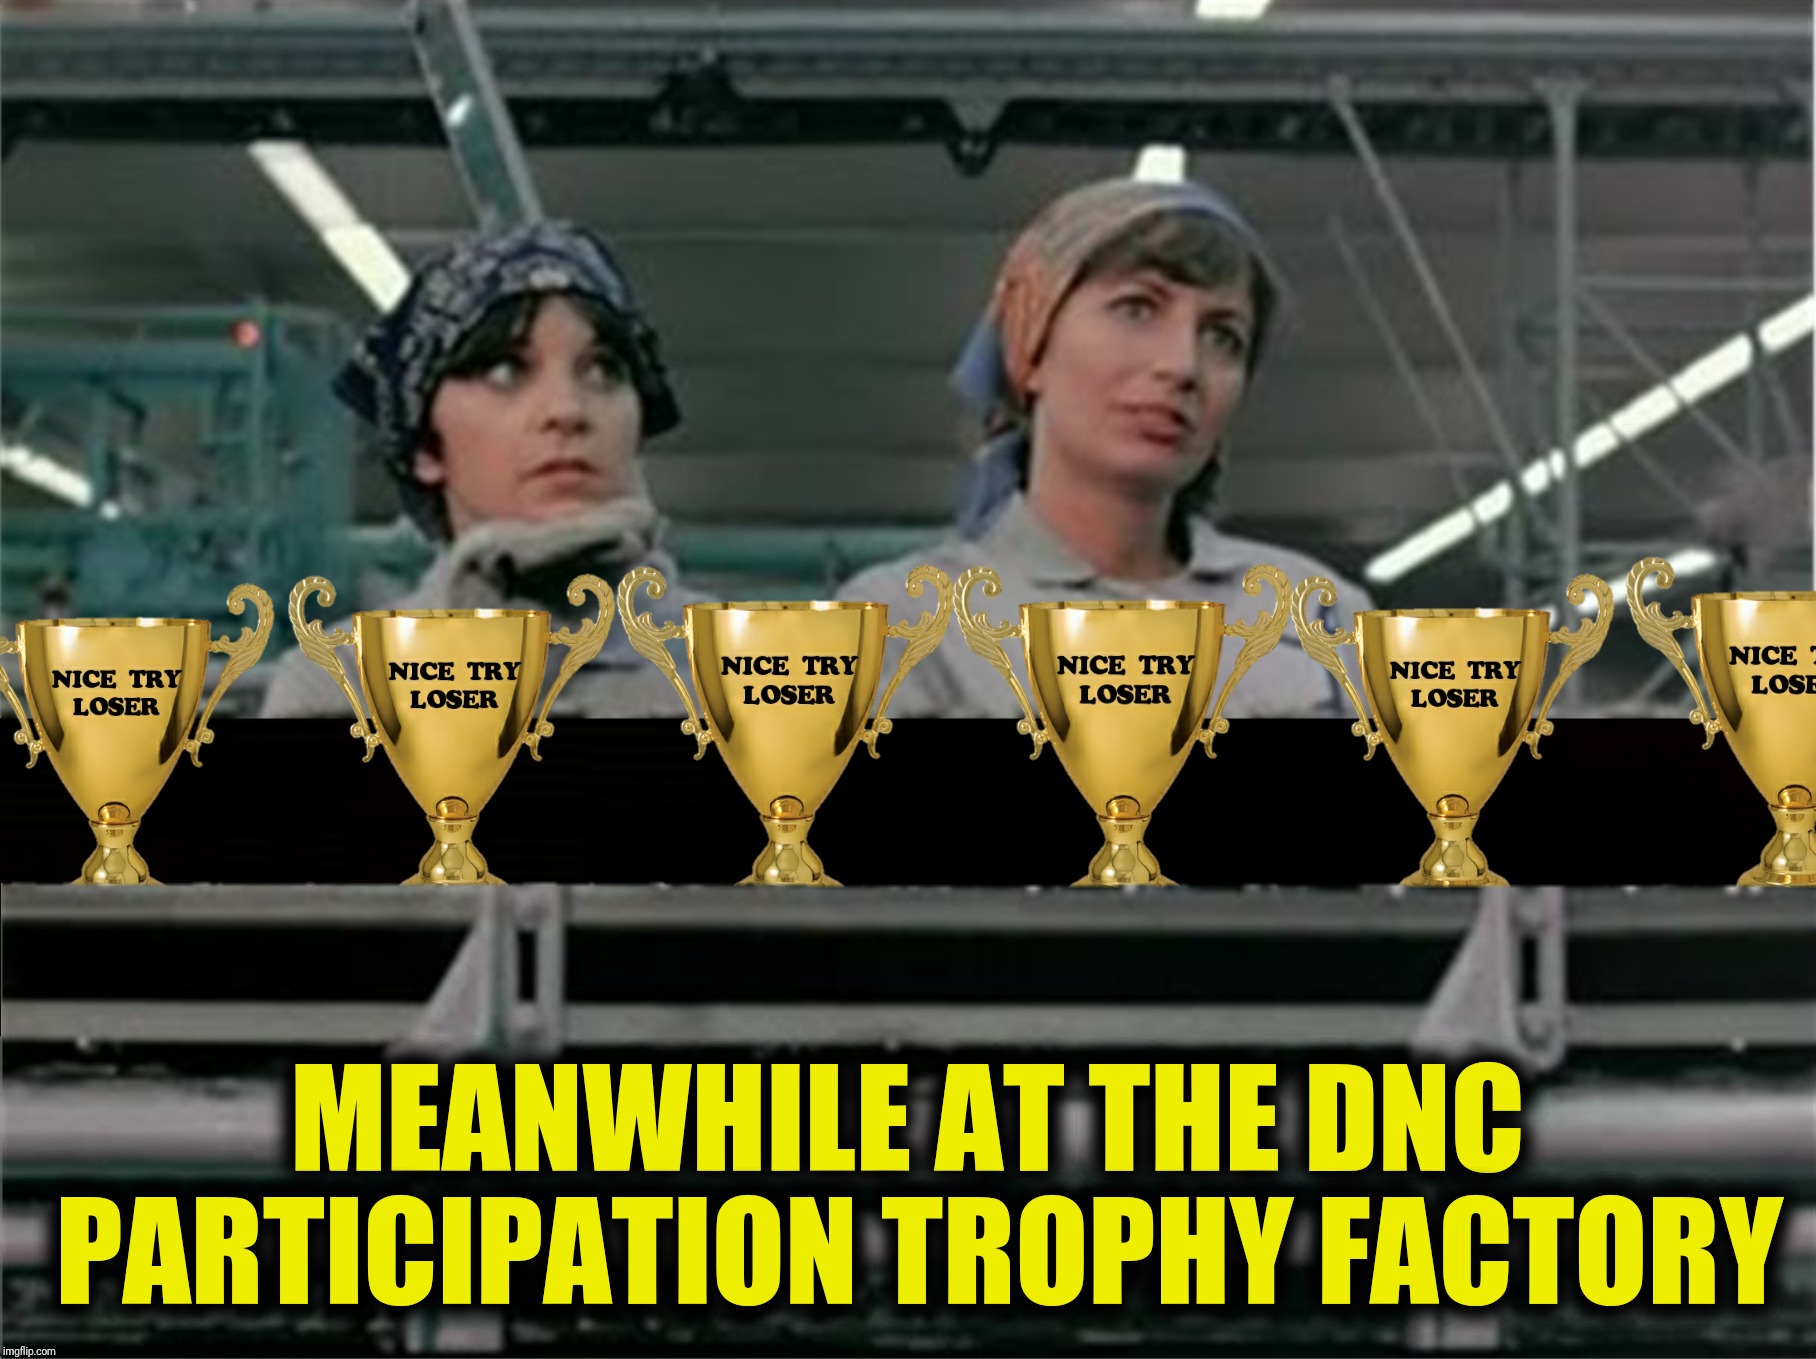 Bad Photoshop Sunday presents:  One, two, three, four, five, six, seven, eight, Insleeal, E. Swalwell, Hickenlooper Incorporated | MEANWHILE AT THE DNC PARTICIPATION TROPHY FACTORY | image tagged in bad photoshop sunday,laverne and shirley,participation trophy,dnc | made w/ Imgflip meme maker